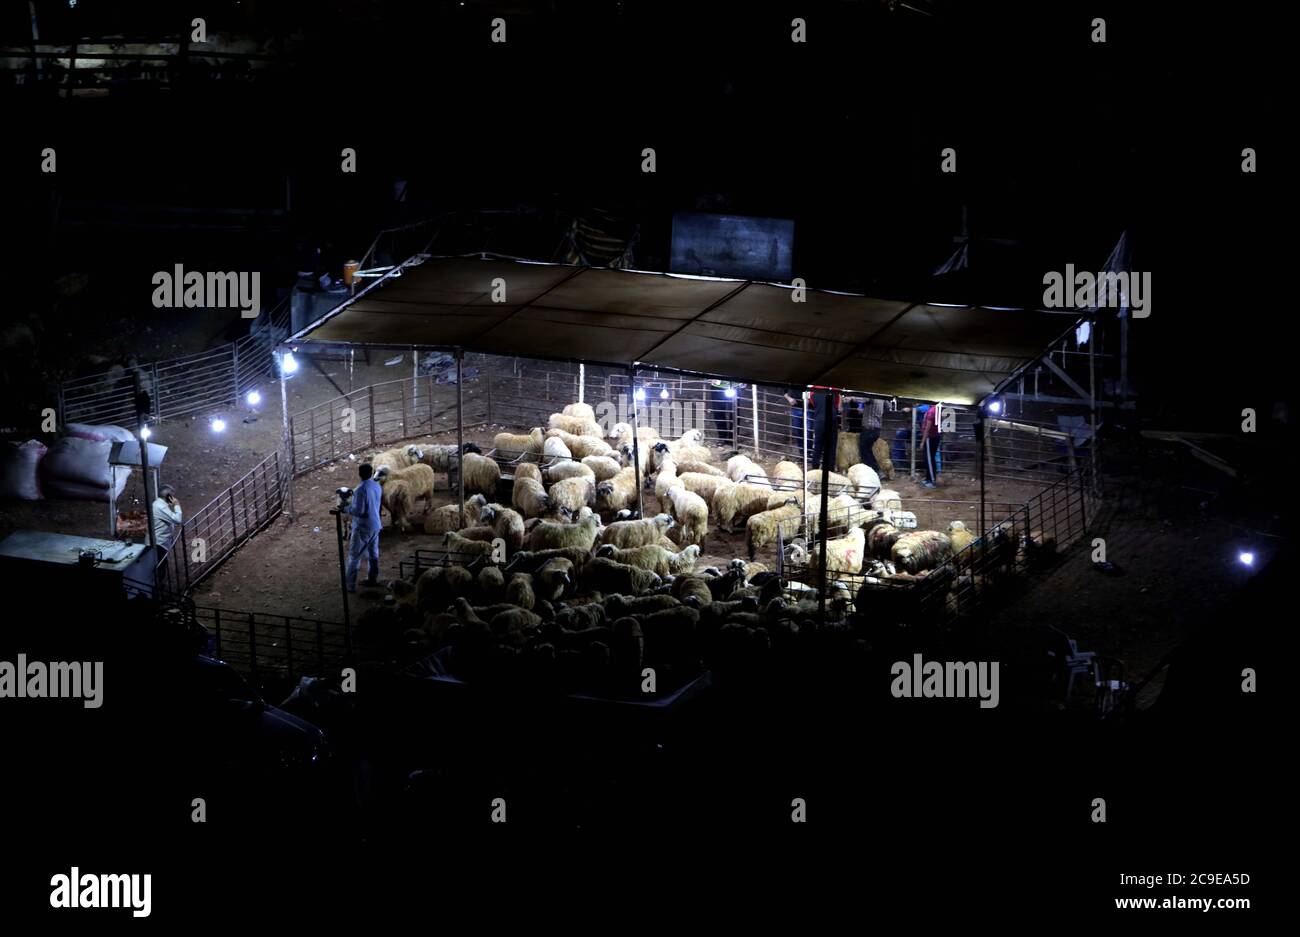 Tectonic Mobilisere blyant Amman, Jordan. 30th July, 2020. Livestock sellers wait for customers ahead  of Eid al-Adha festival in Amman, Jordan, July 30, 2020. Jordan decided to  extend the working hours to 1:00 a.m. local